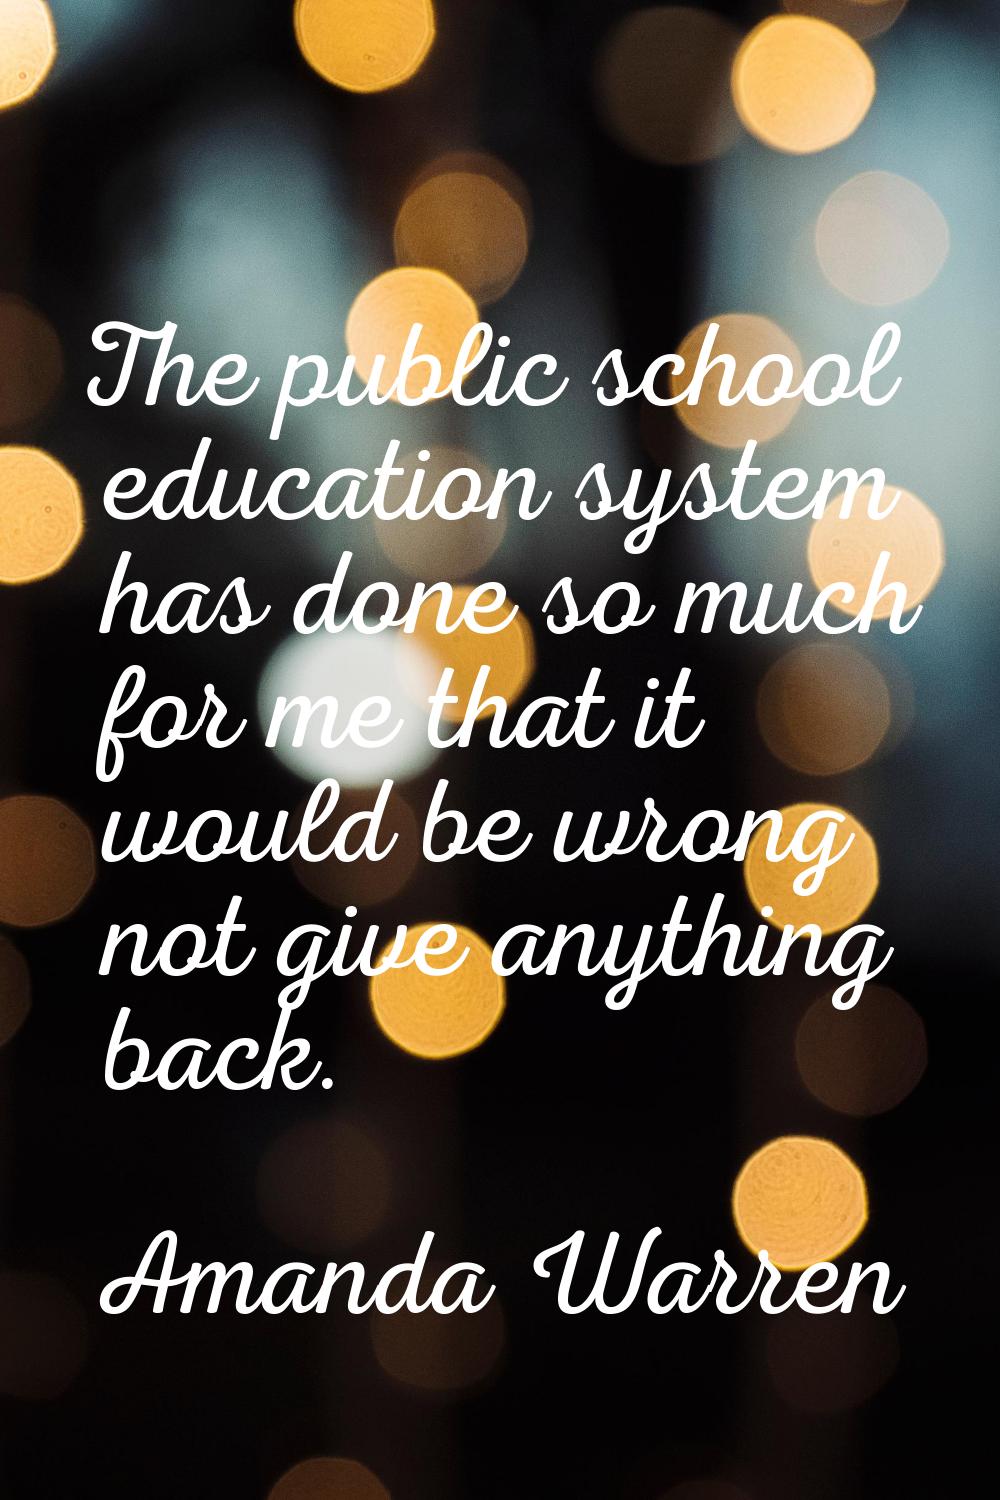 The public school education system has done so much for me that it would be wrong not give anything